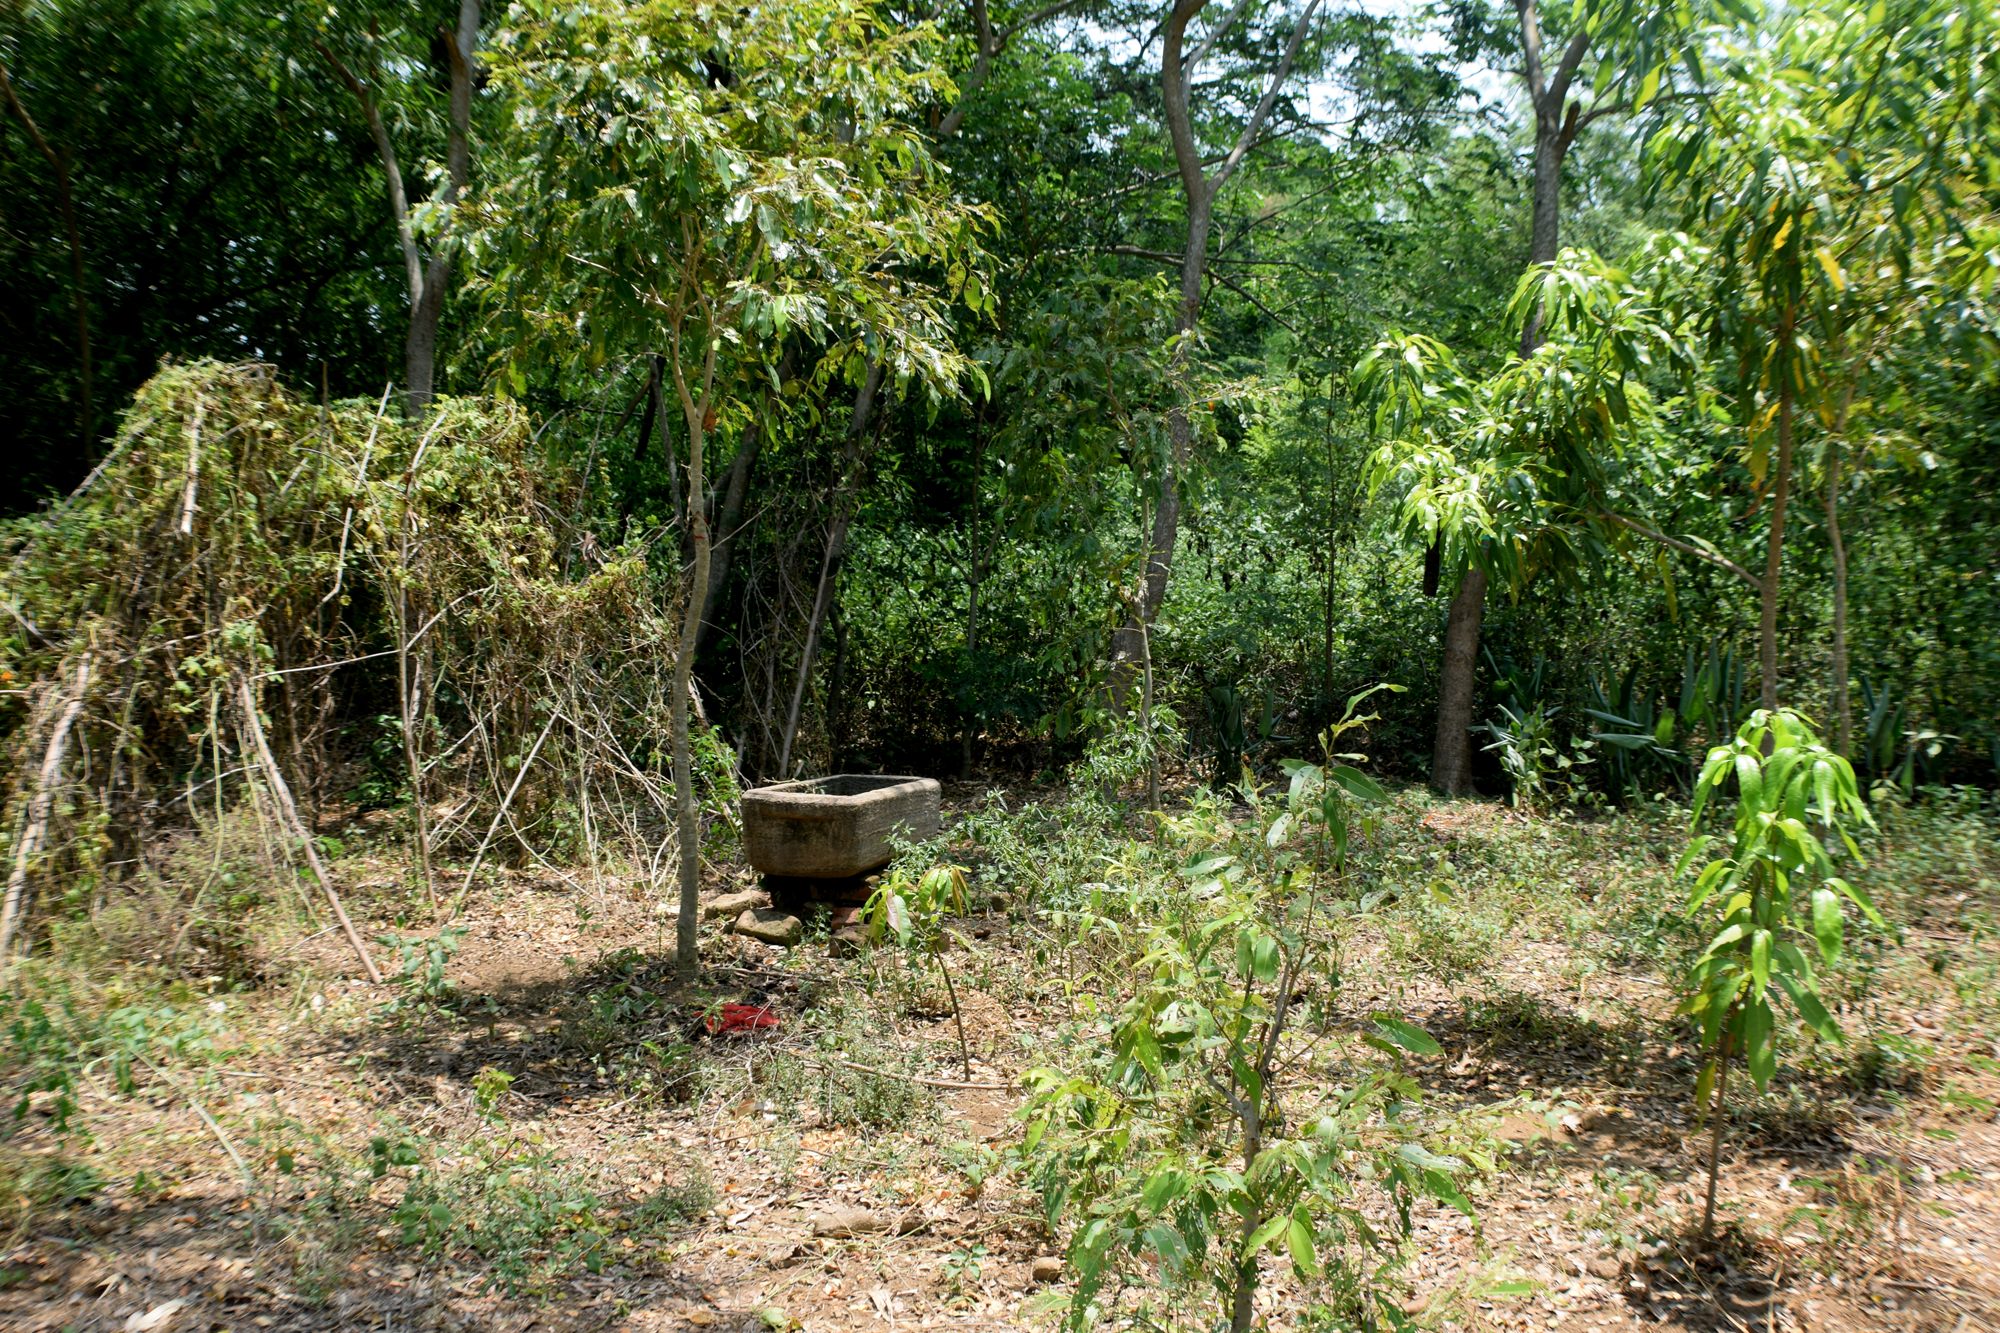 A small area with trees and shrubs fallen into disuse